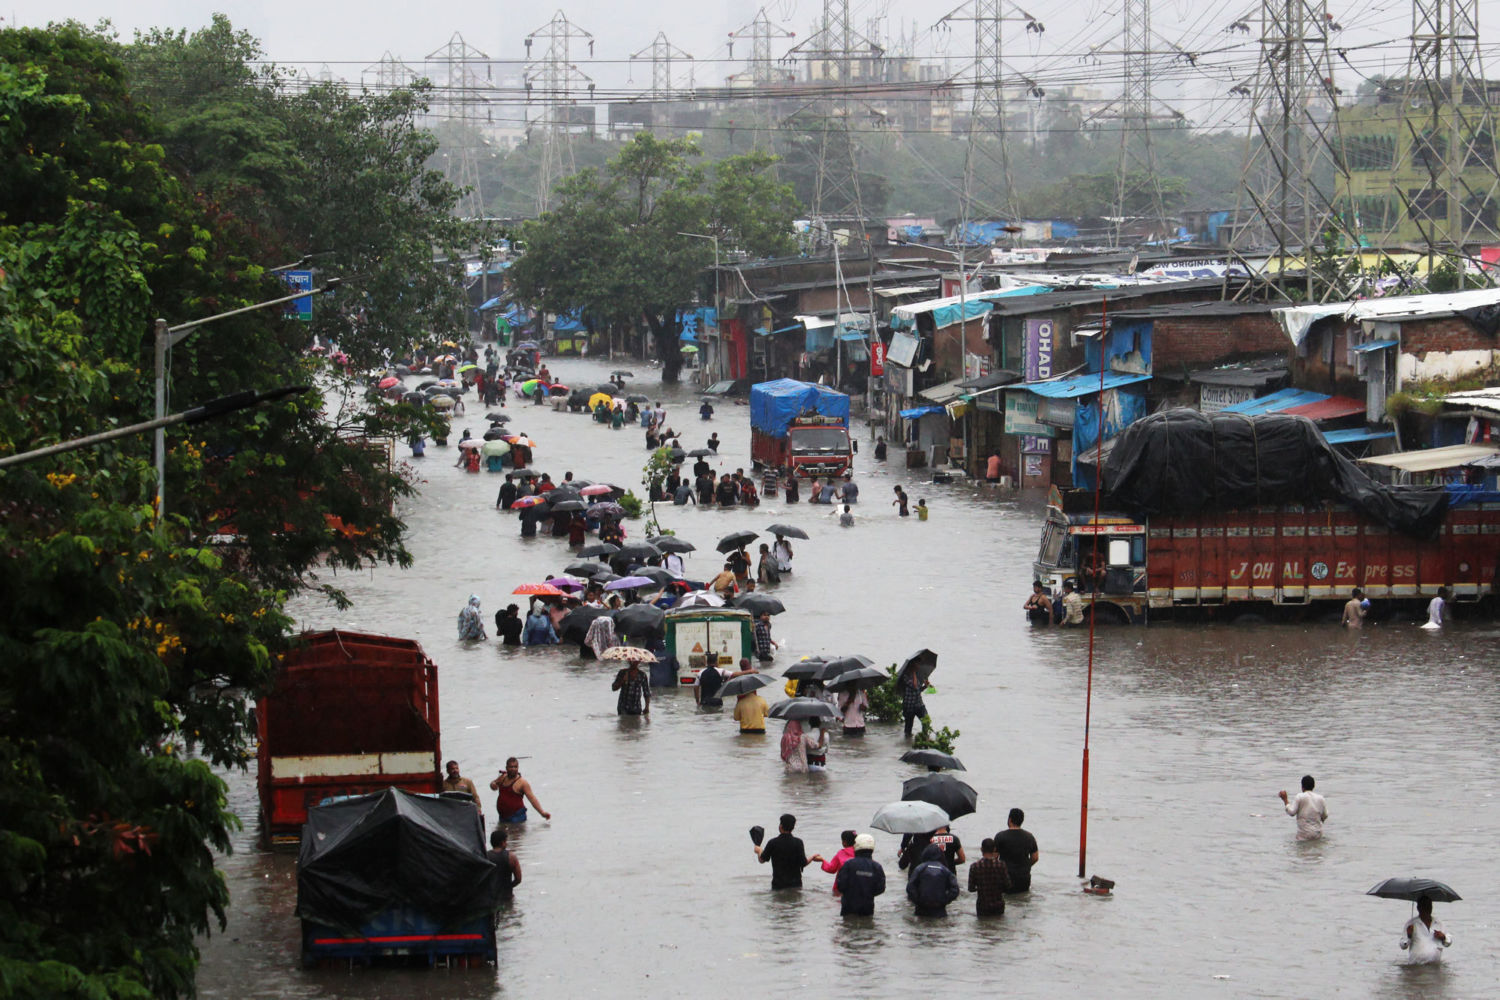 As the Monsoon and Climate Shift, India Faces Worsening Floods - Yale E360